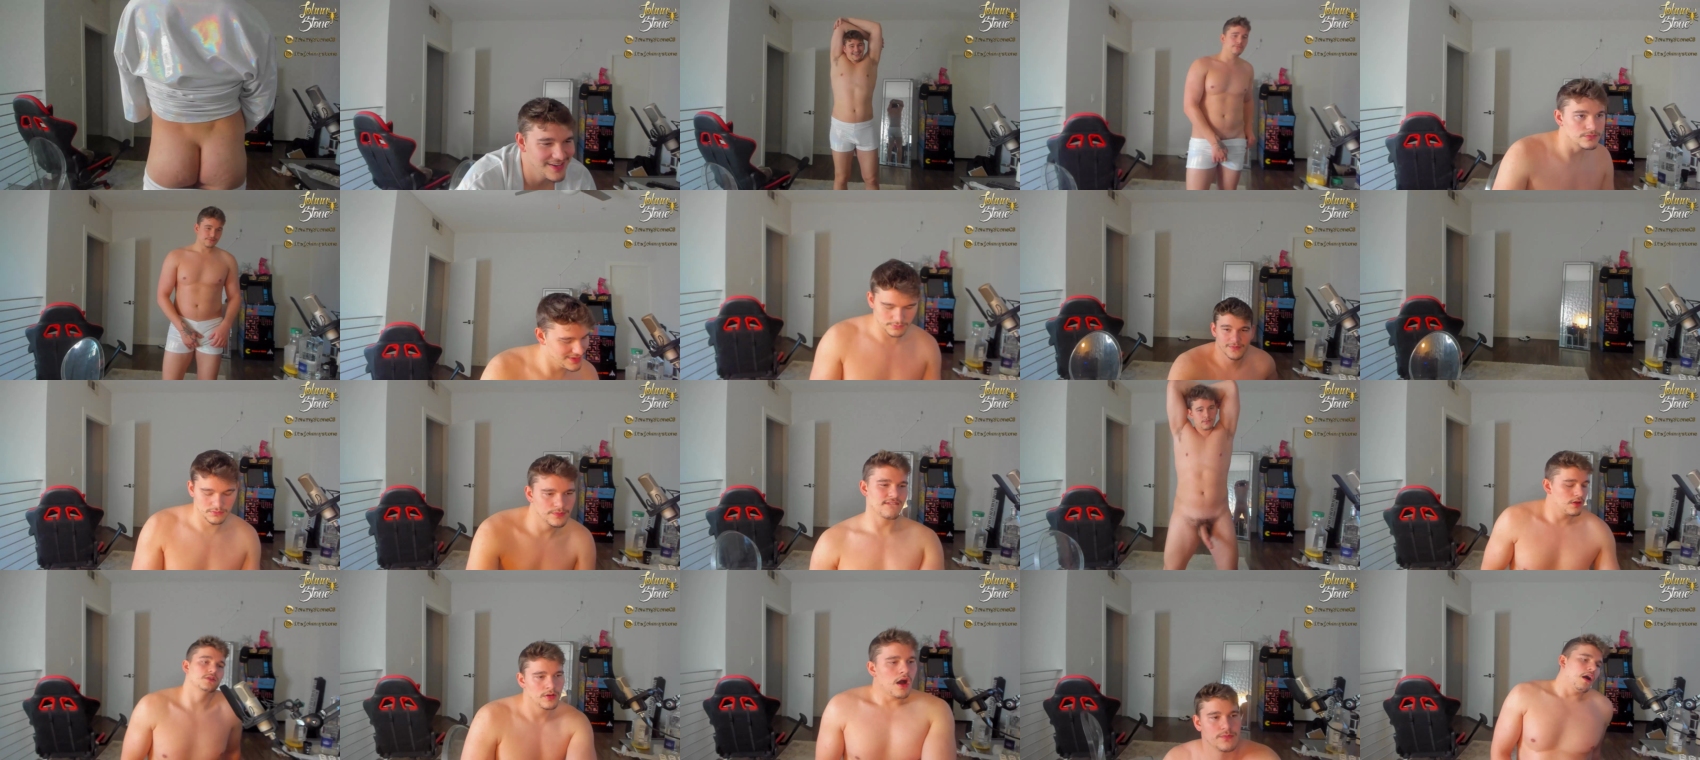 thejohnnystone  19-06-2022 Males hard